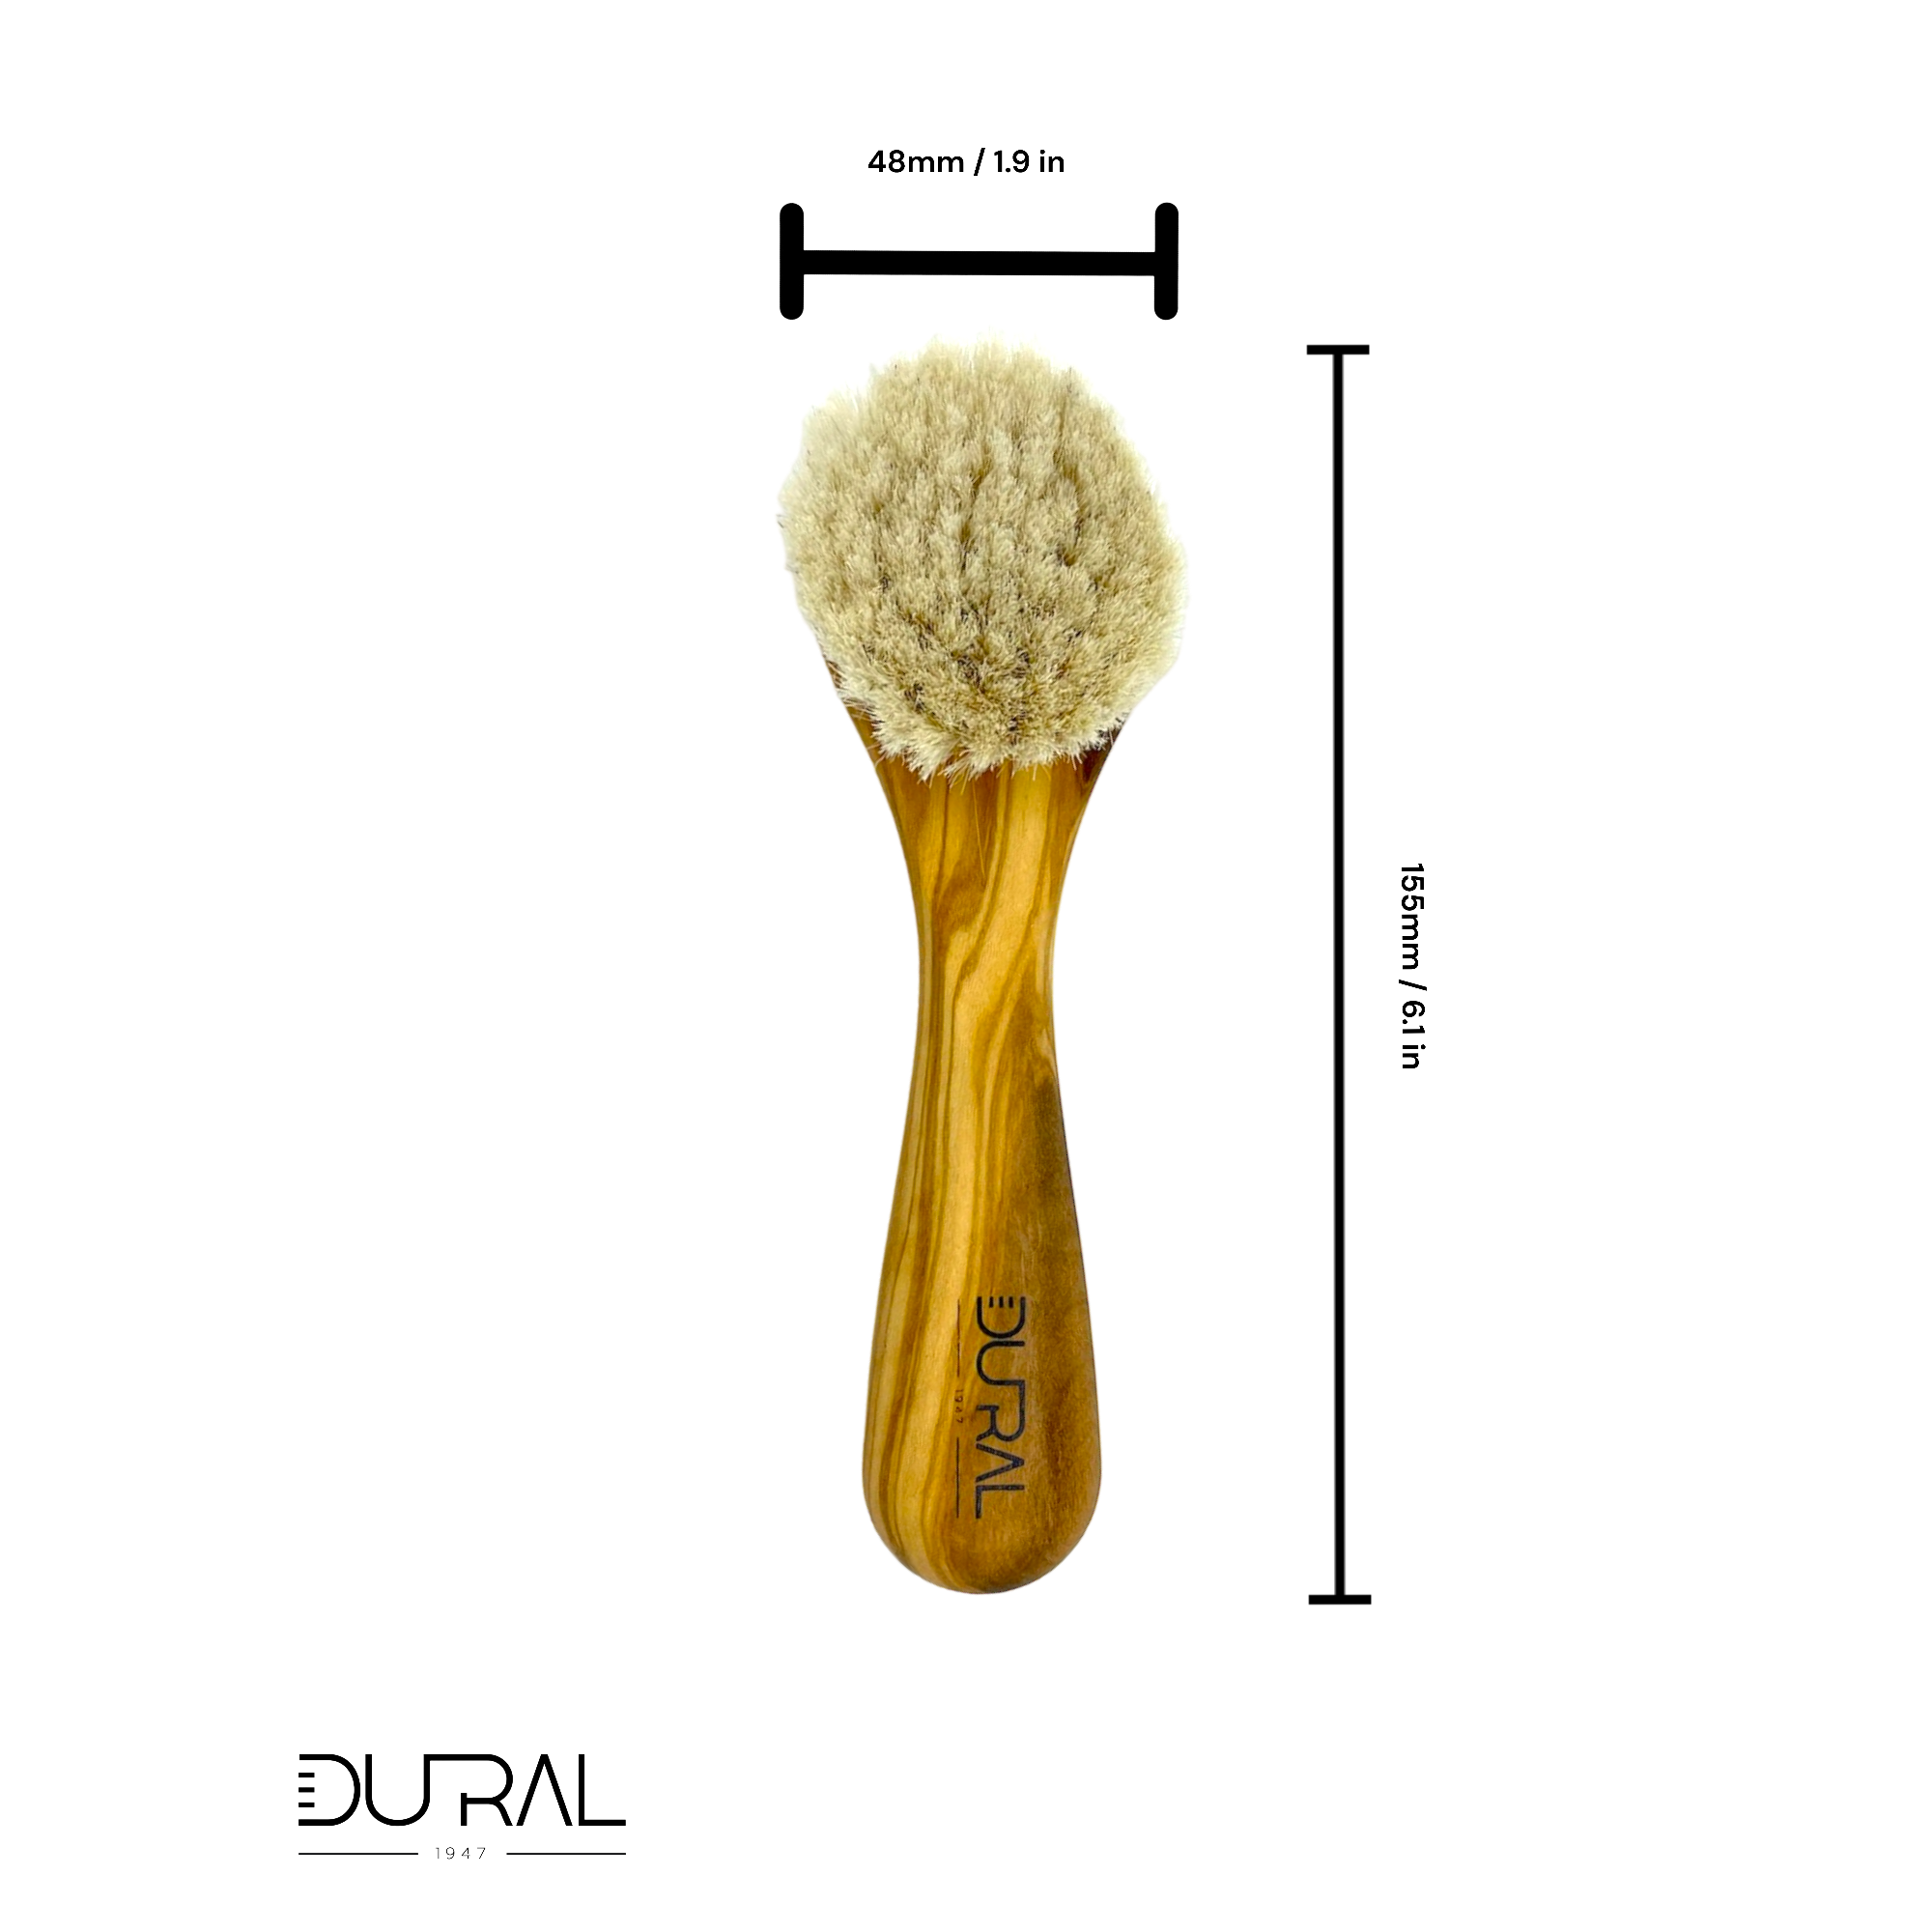 Dural Olive wood face & skin brush with natural goats hair